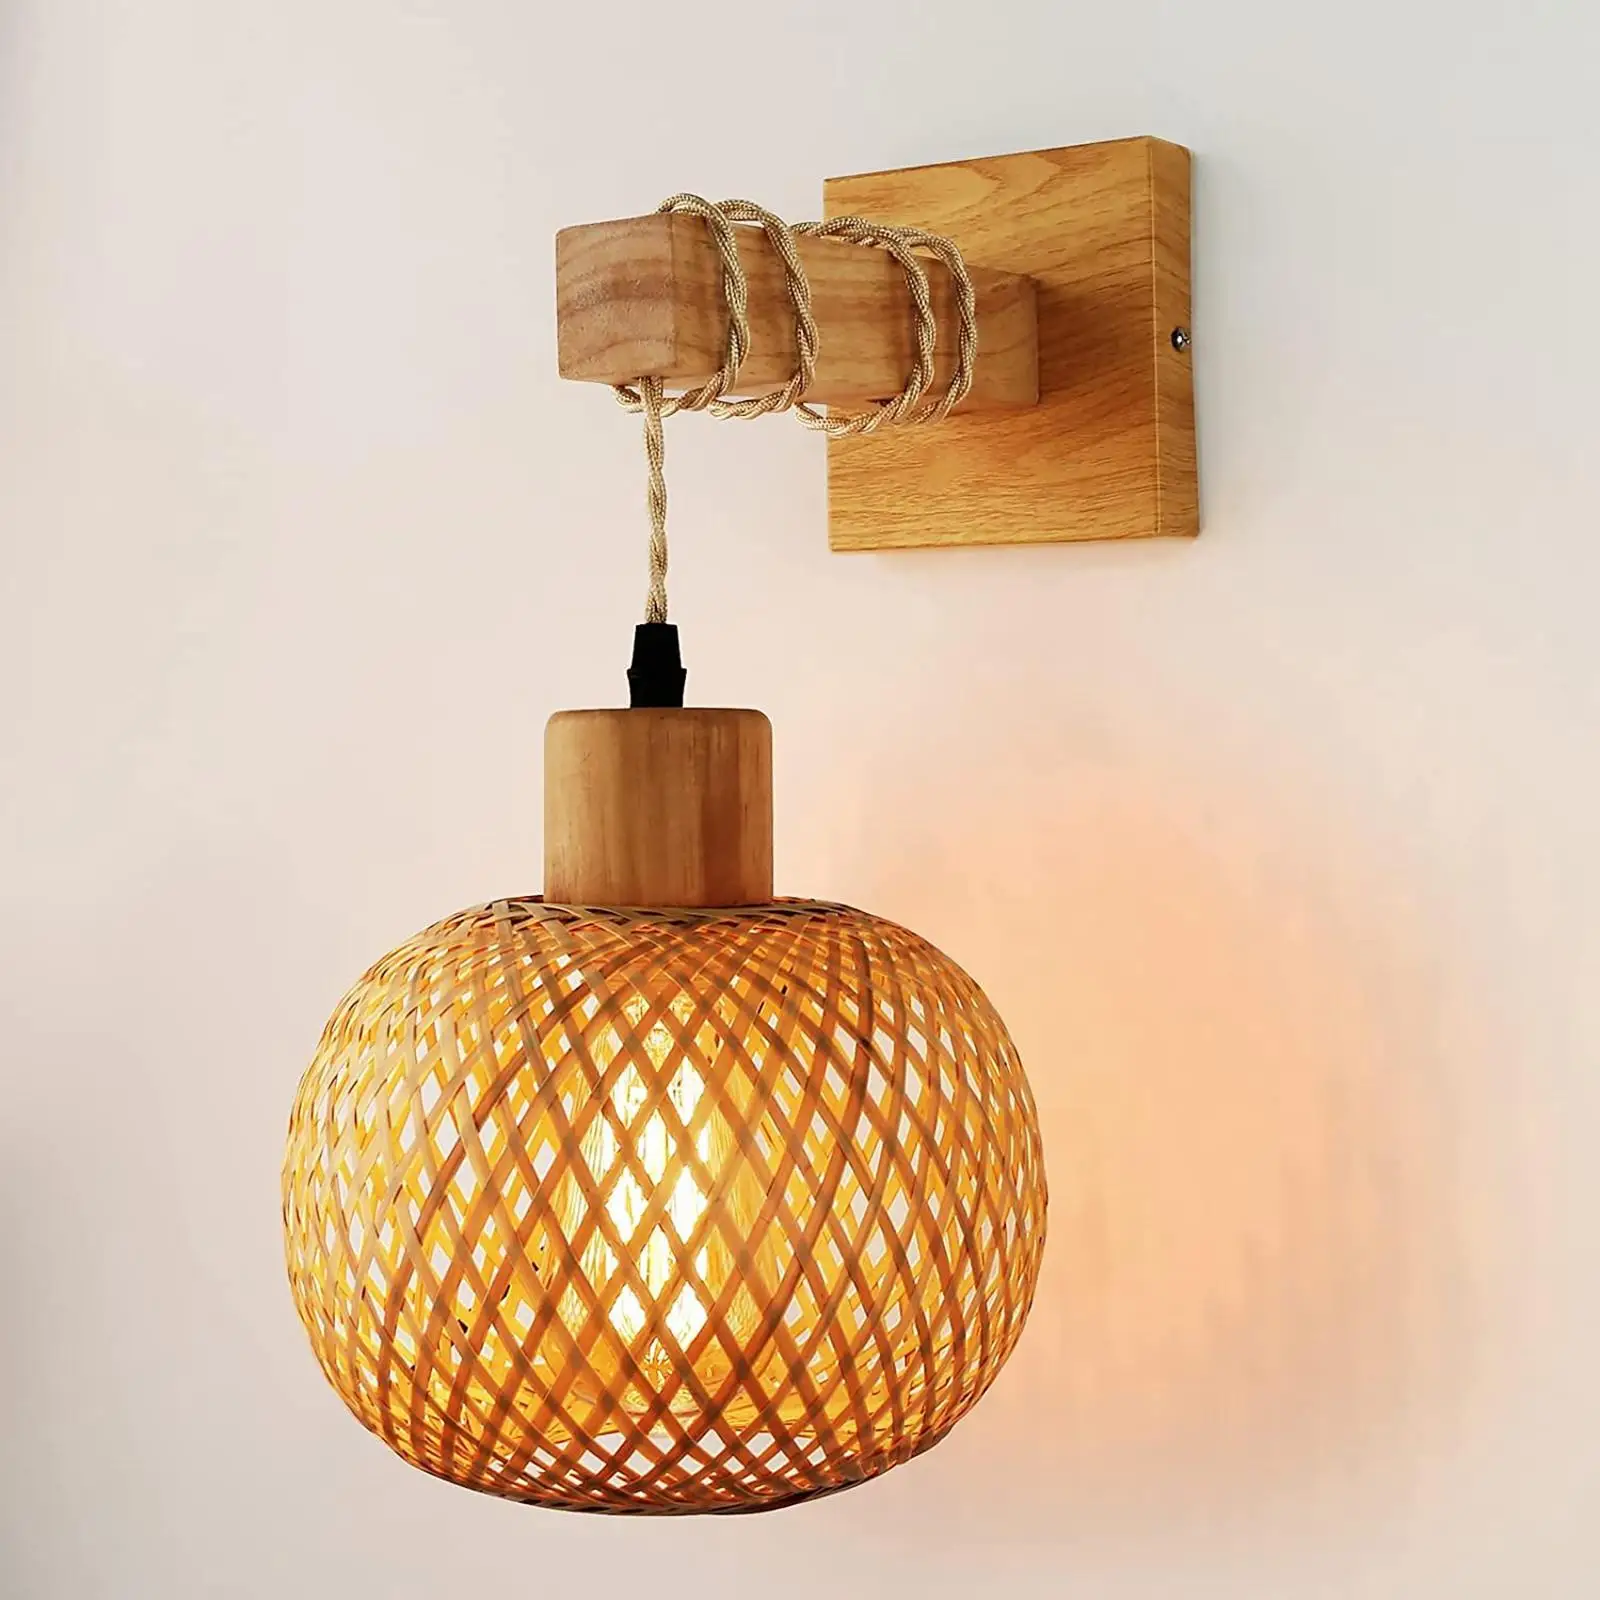 Rattan Wall Sconce Handmade Bamboo Woven for Living Room Bedroom Bedside